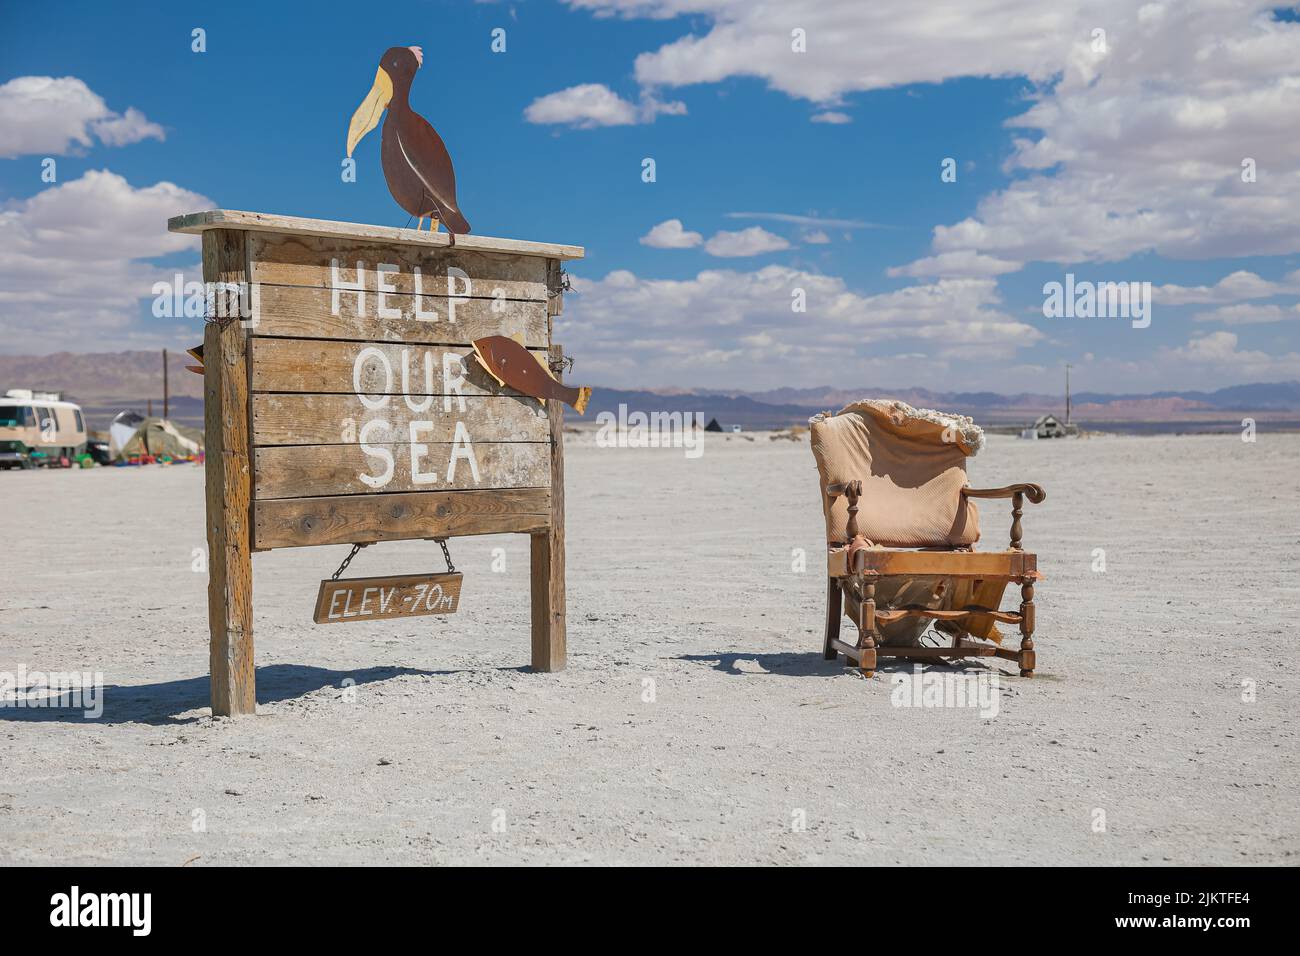 Renegade artists have created odd installations along the dry lakeshore of the Salton Sea in Bombay Beach. Stock Photo